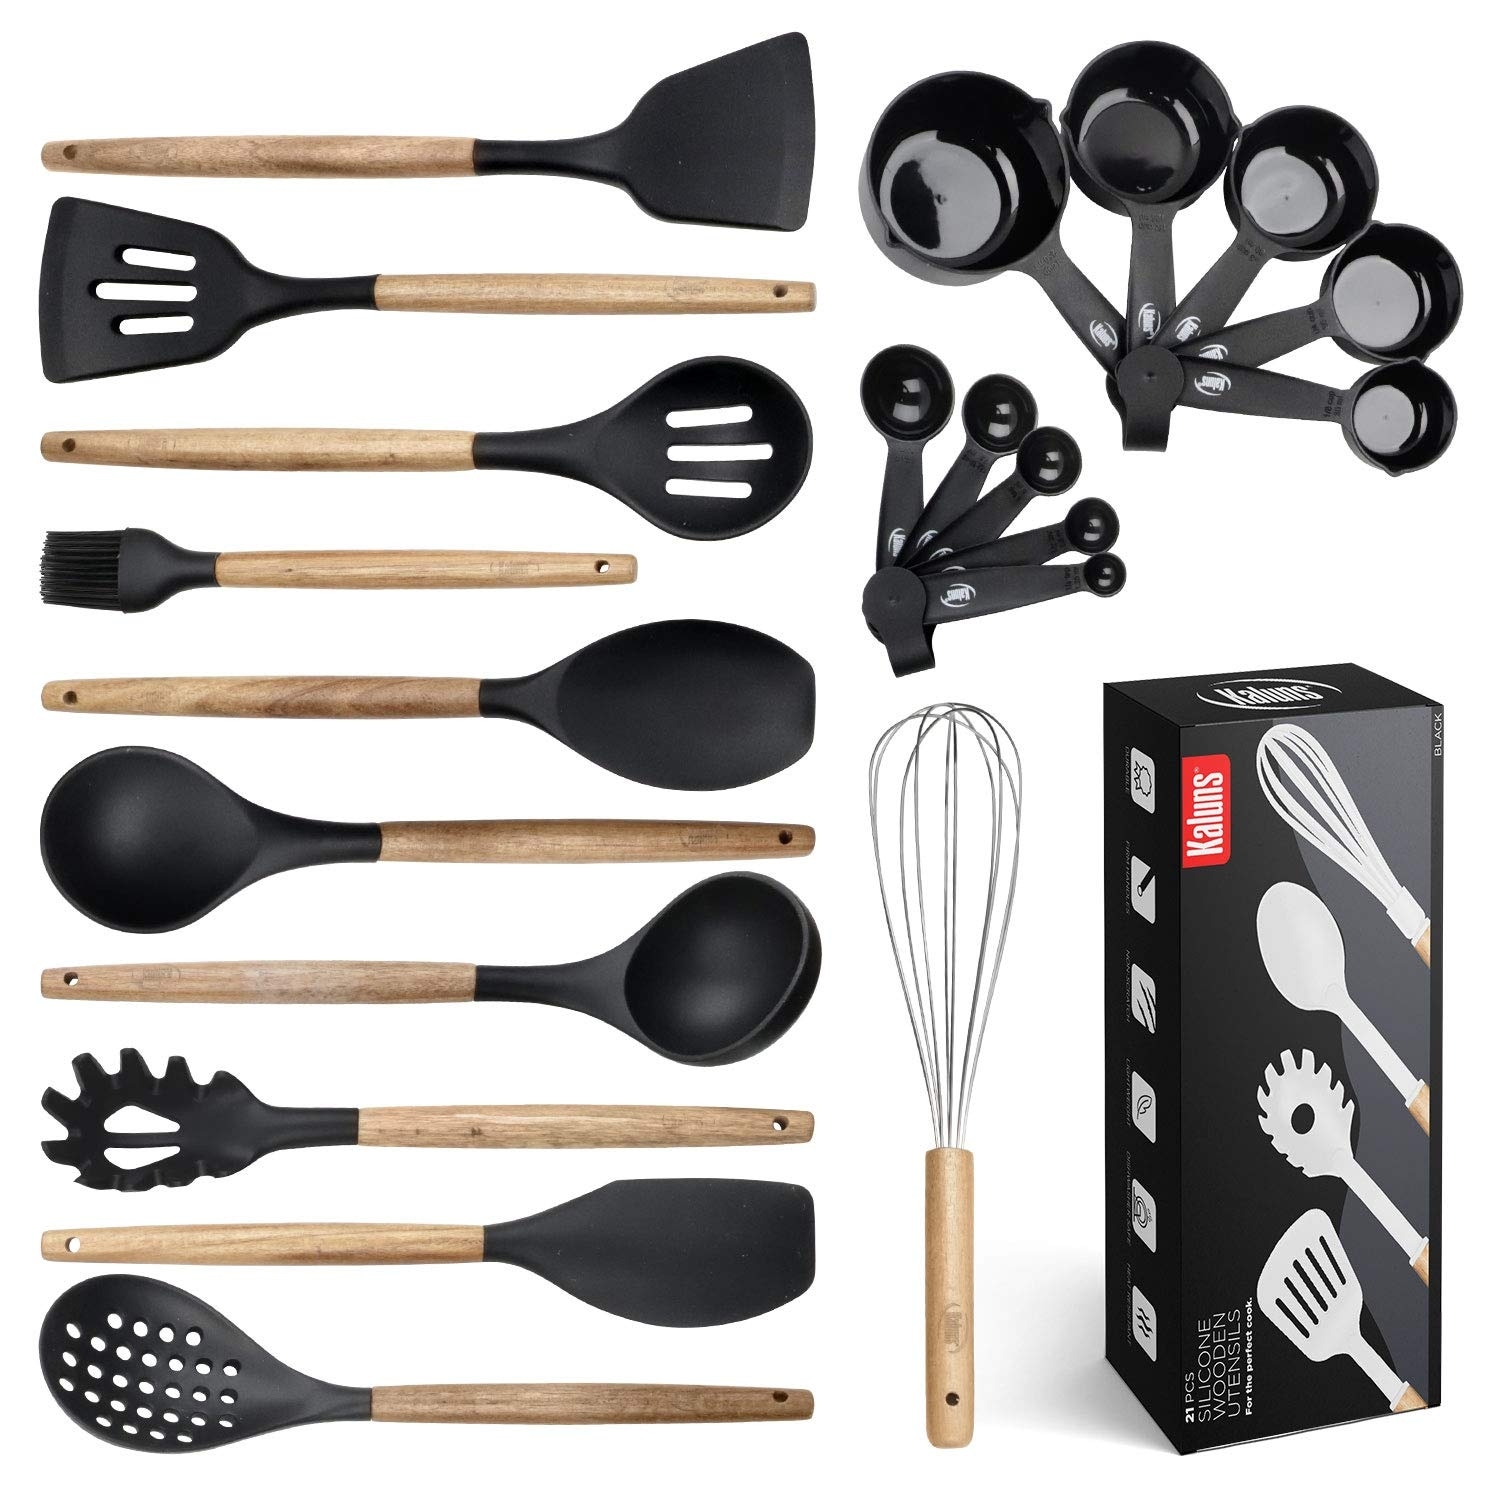 https://ak1.ostkcdn.com/images/products/is/images/direct/6ad324f1a2b6cedc0a84b6c938a38e1ef0669ae1/Kitchen-Utensils-Set%2C-21-Wood-and-Silicone-Cooking-Utensil-Set.jpg